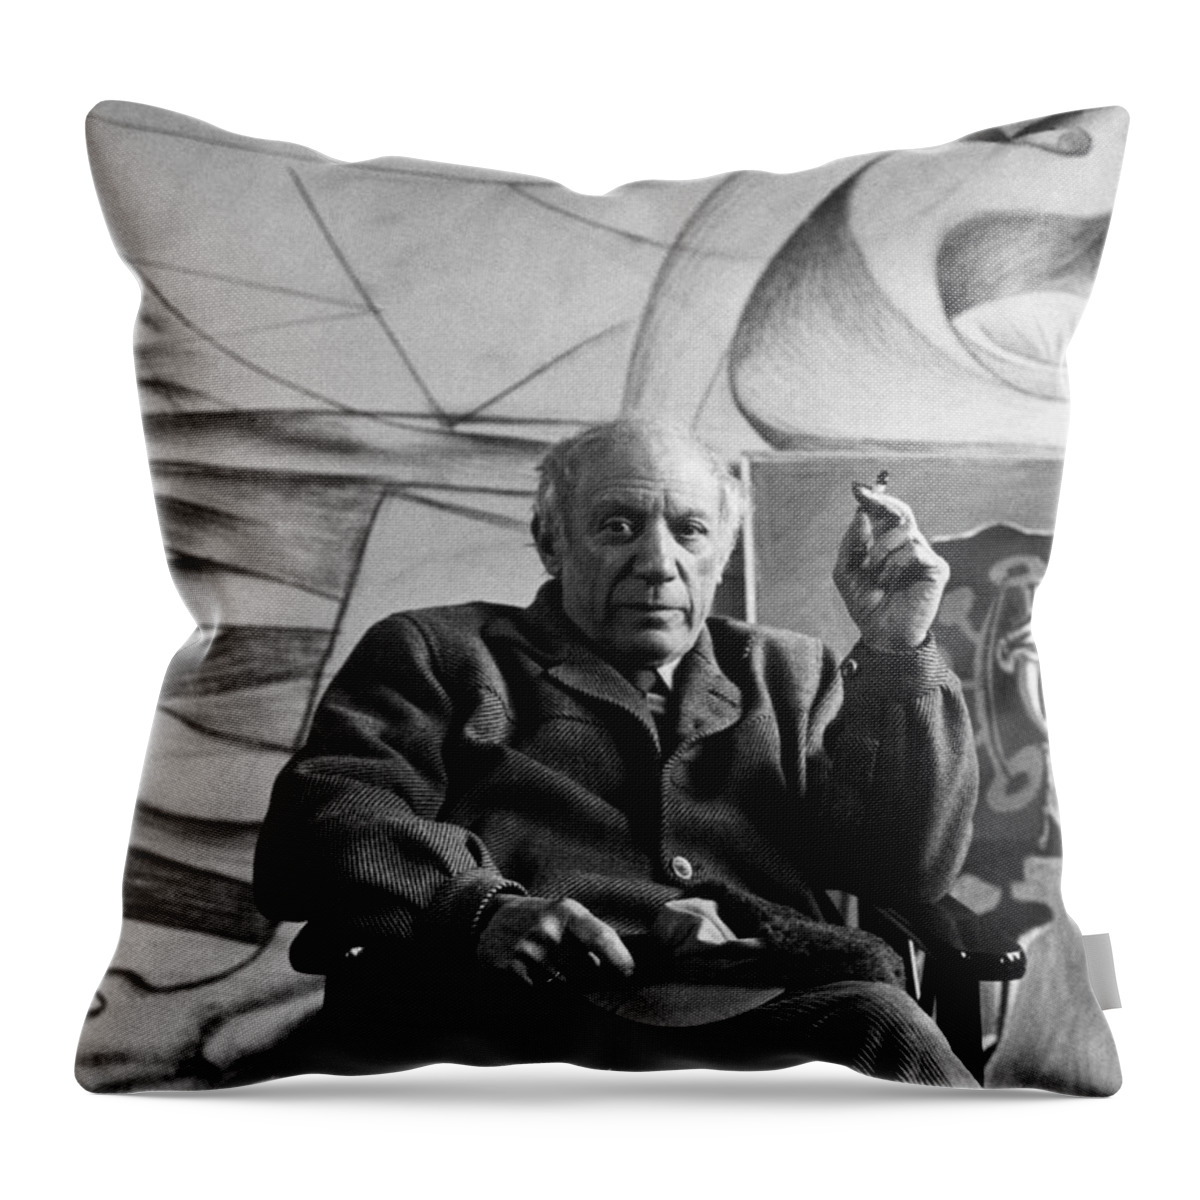 Art Throw Pillow featuring the painting Pablo Picasso by Sanford Roth